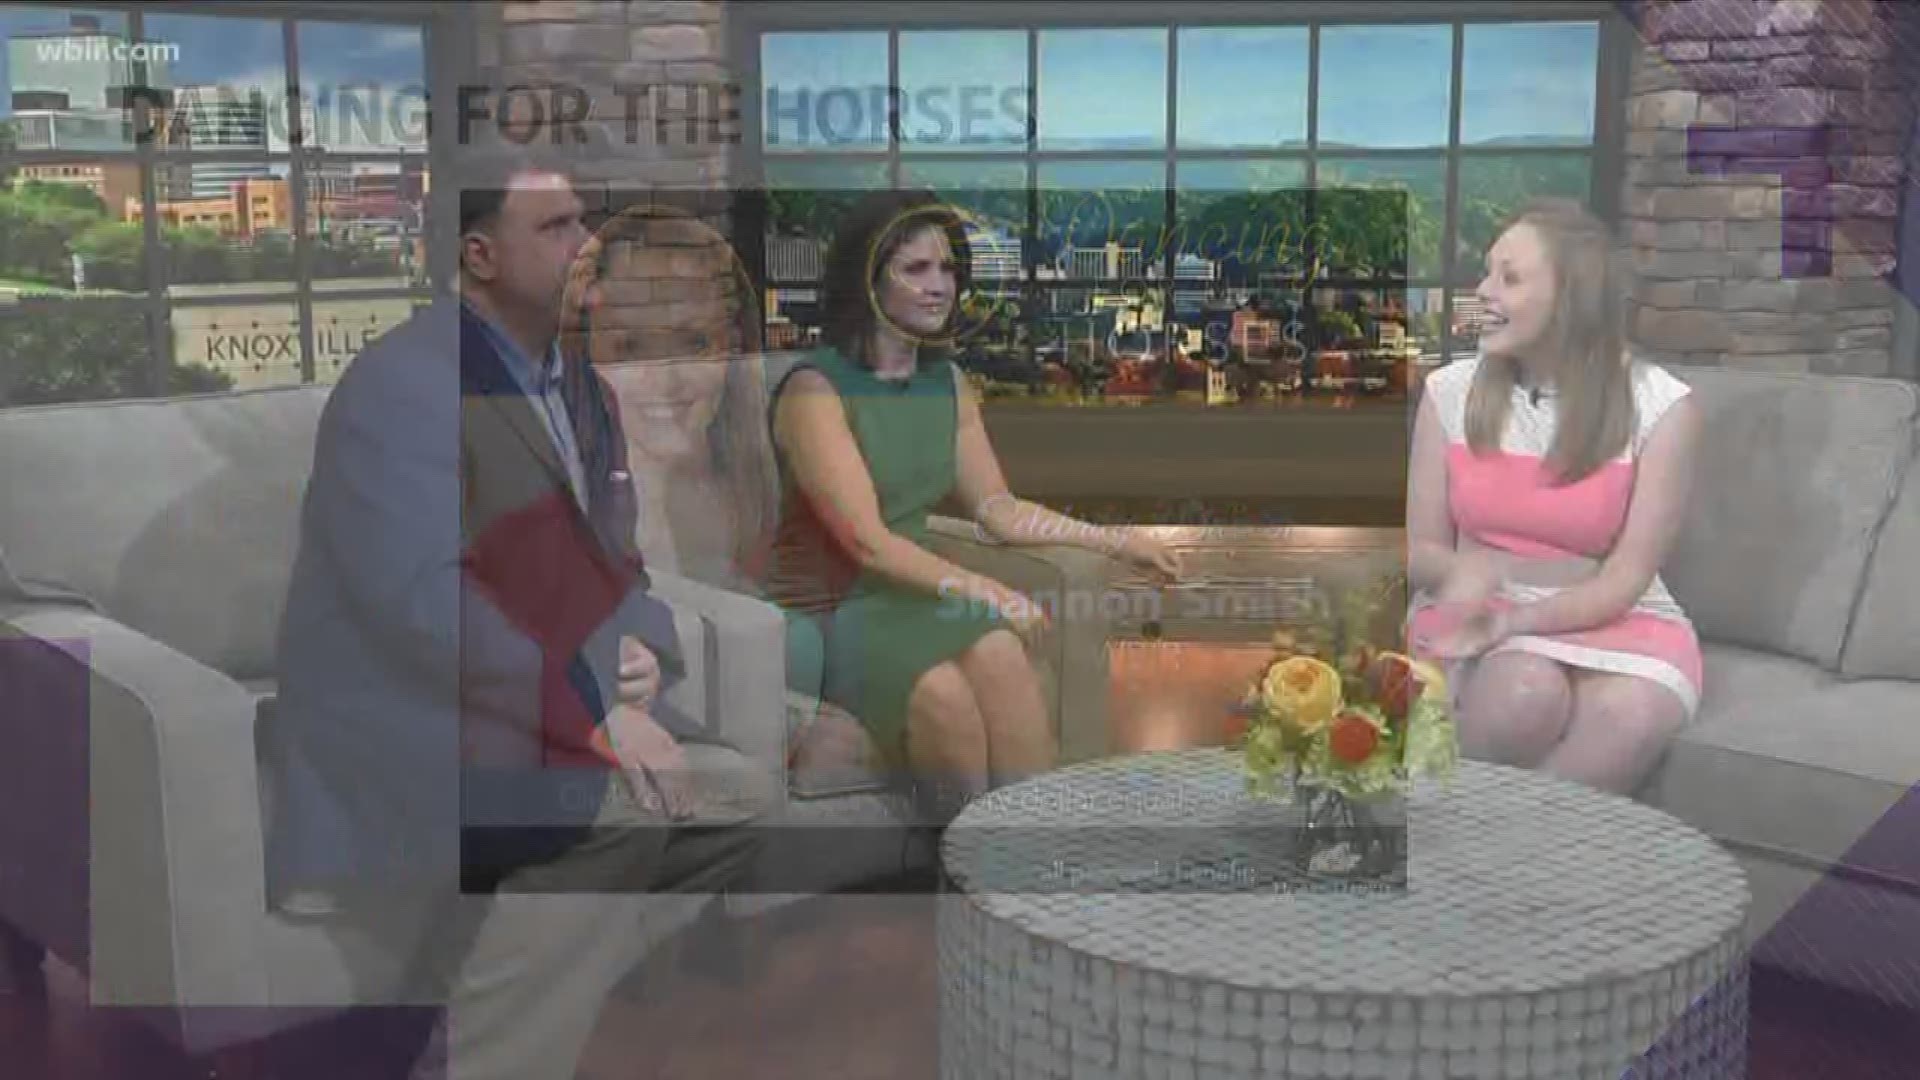 Reporter Shannon Smith is Dancing for the Horses to benefit Horse Haven of Tennessee. To vote for Shannon visit wbir.comMay 17, 2018-4pm